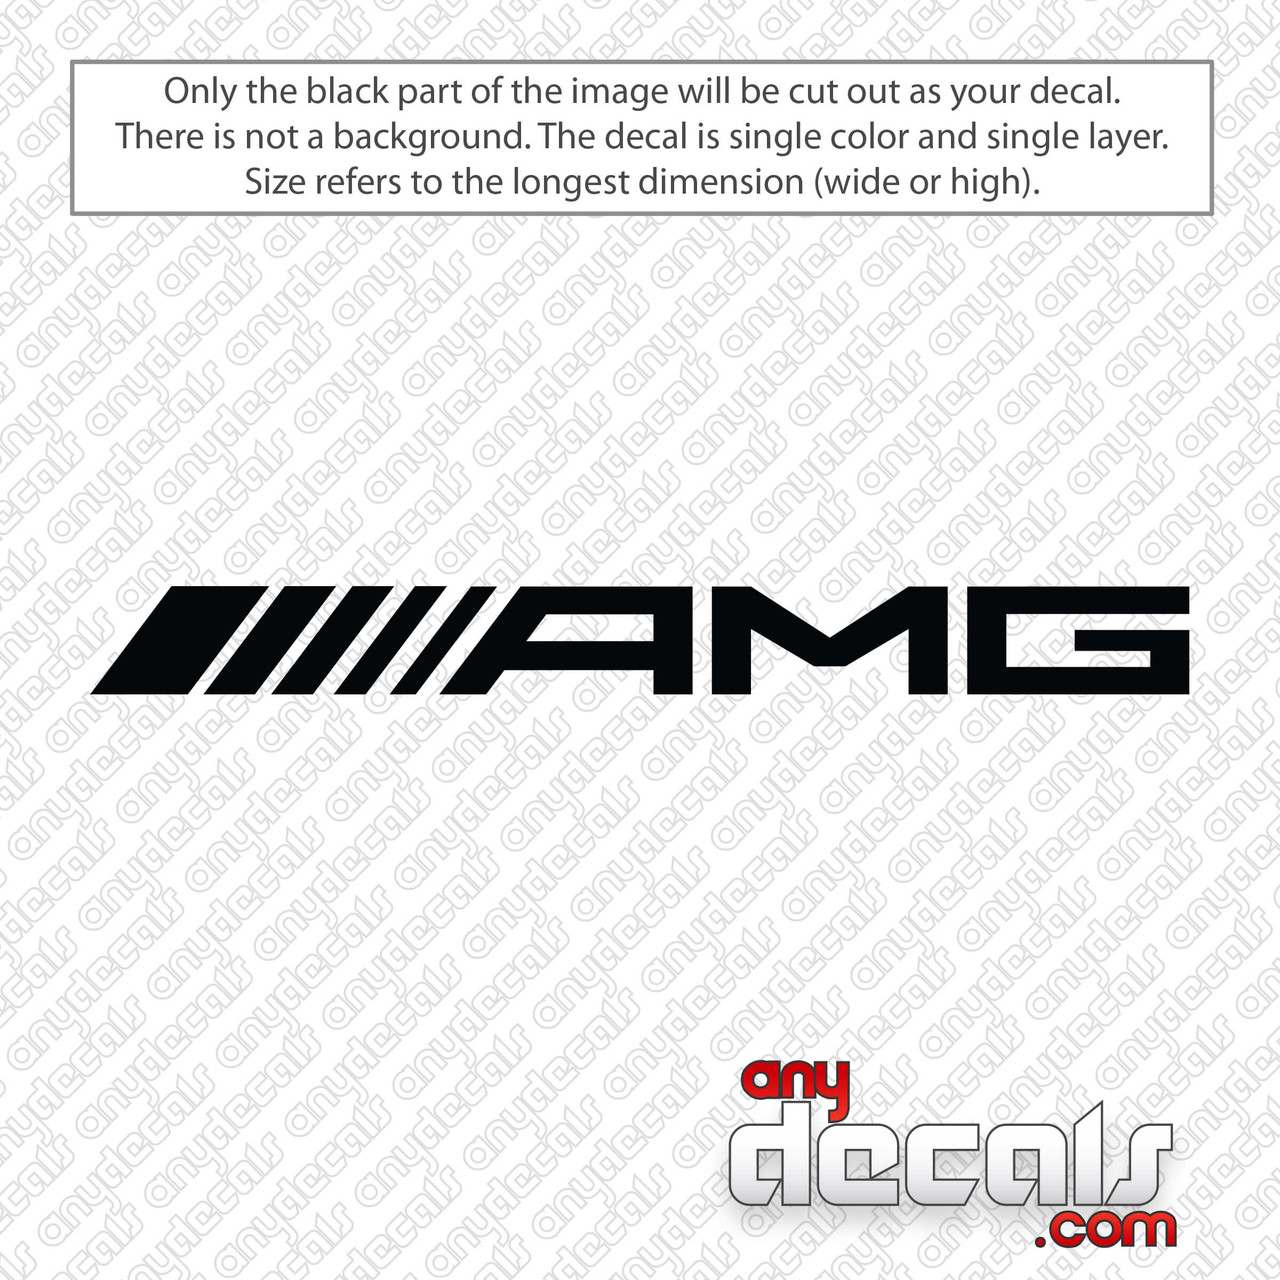 https://cdn11.bigcommerce.com/s-df97c/images/stencil/1280x1280/products/1441/2459/mercedes-amg-bomb-decal-sticker__16200.1609395622.jpg?c=2?imbypass=on